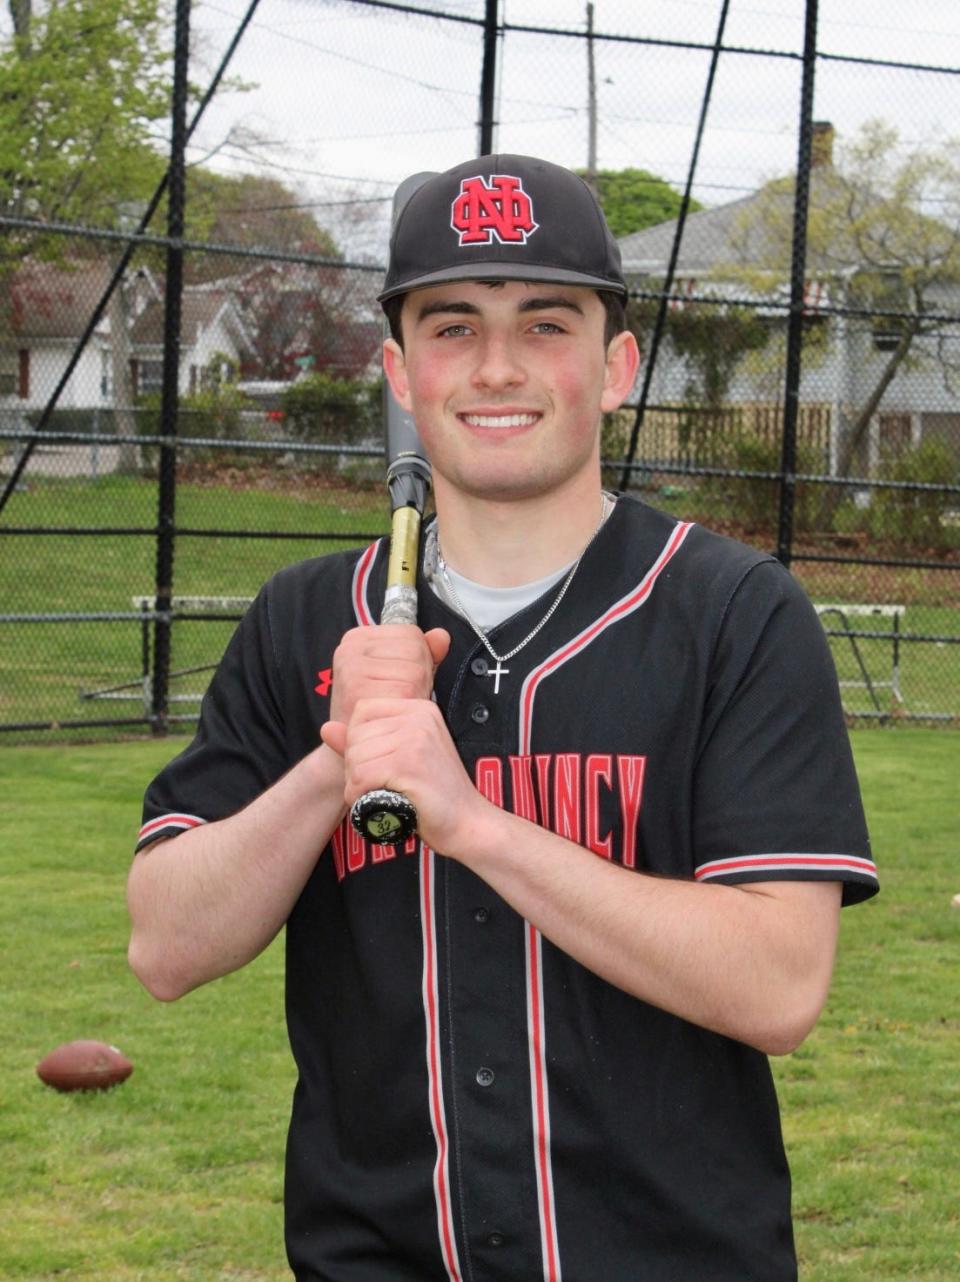 Vinny O'Leary of North Quincy High has been named to The Patriot Ledger/Enterprise All-Scholastic Baseball Team.